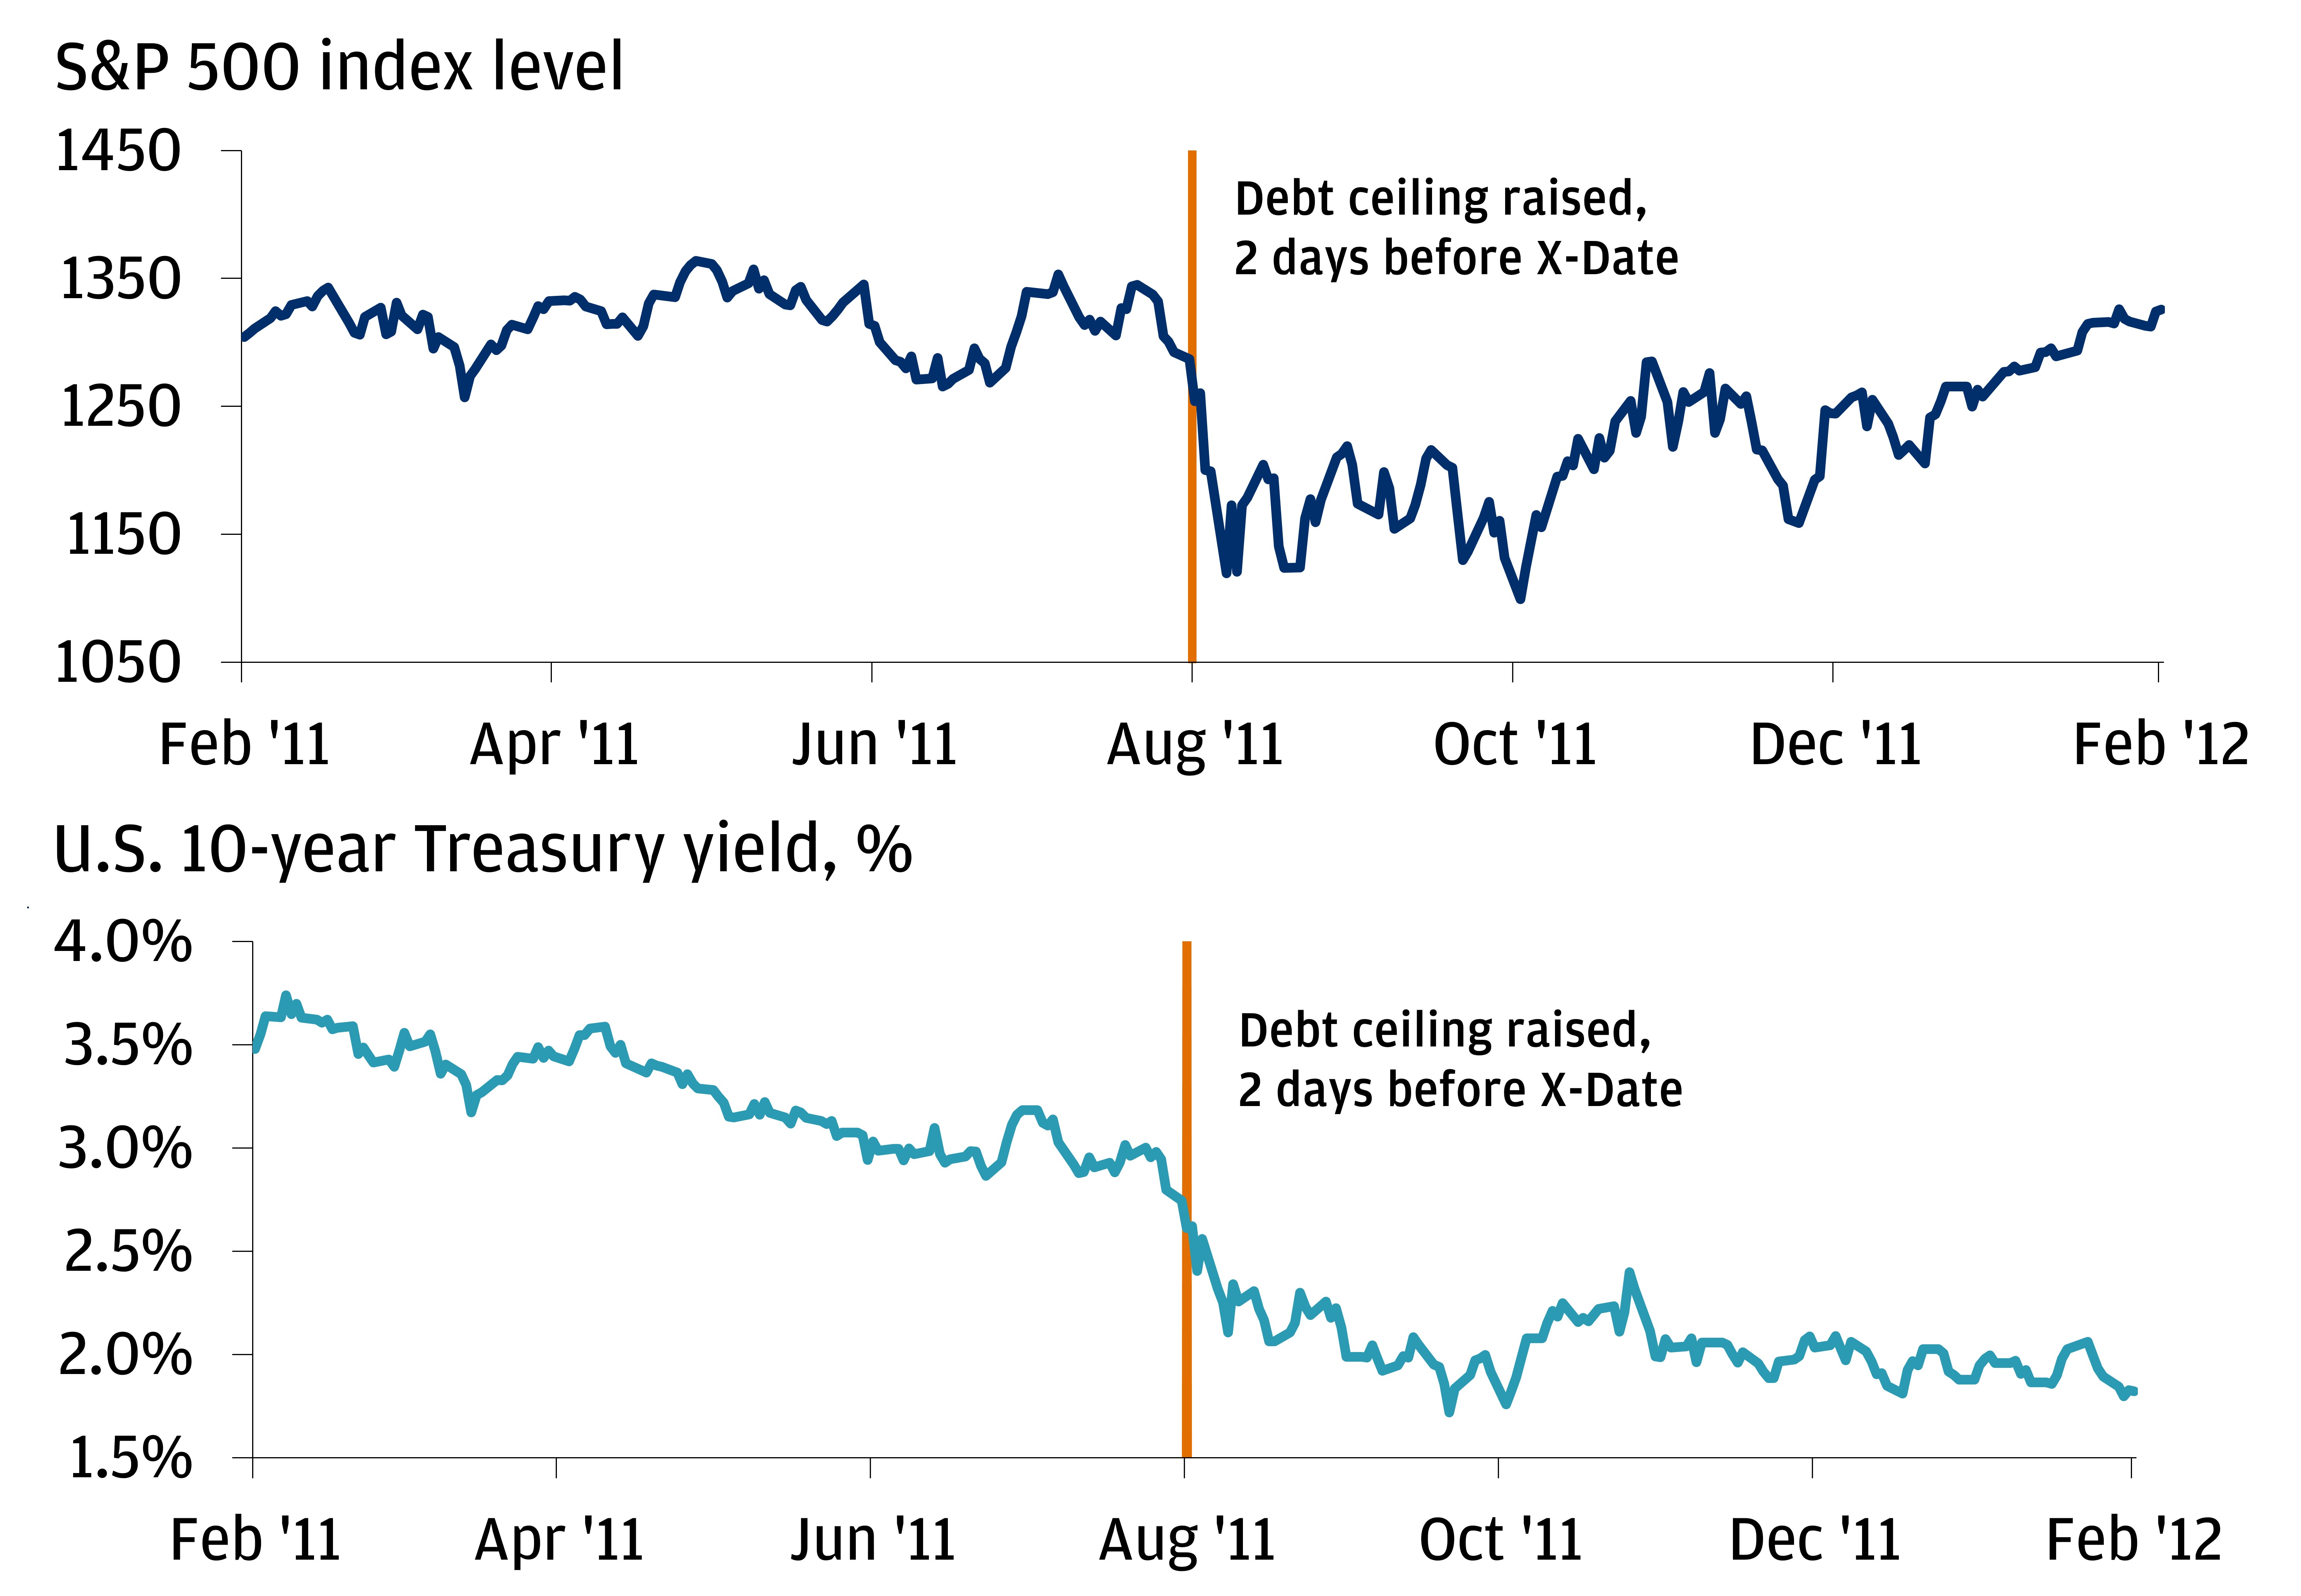 This chart shows the S&P 500 Index level and U.S. 10-year Treasury yield from February 2, 2011, until February 2, 2012.